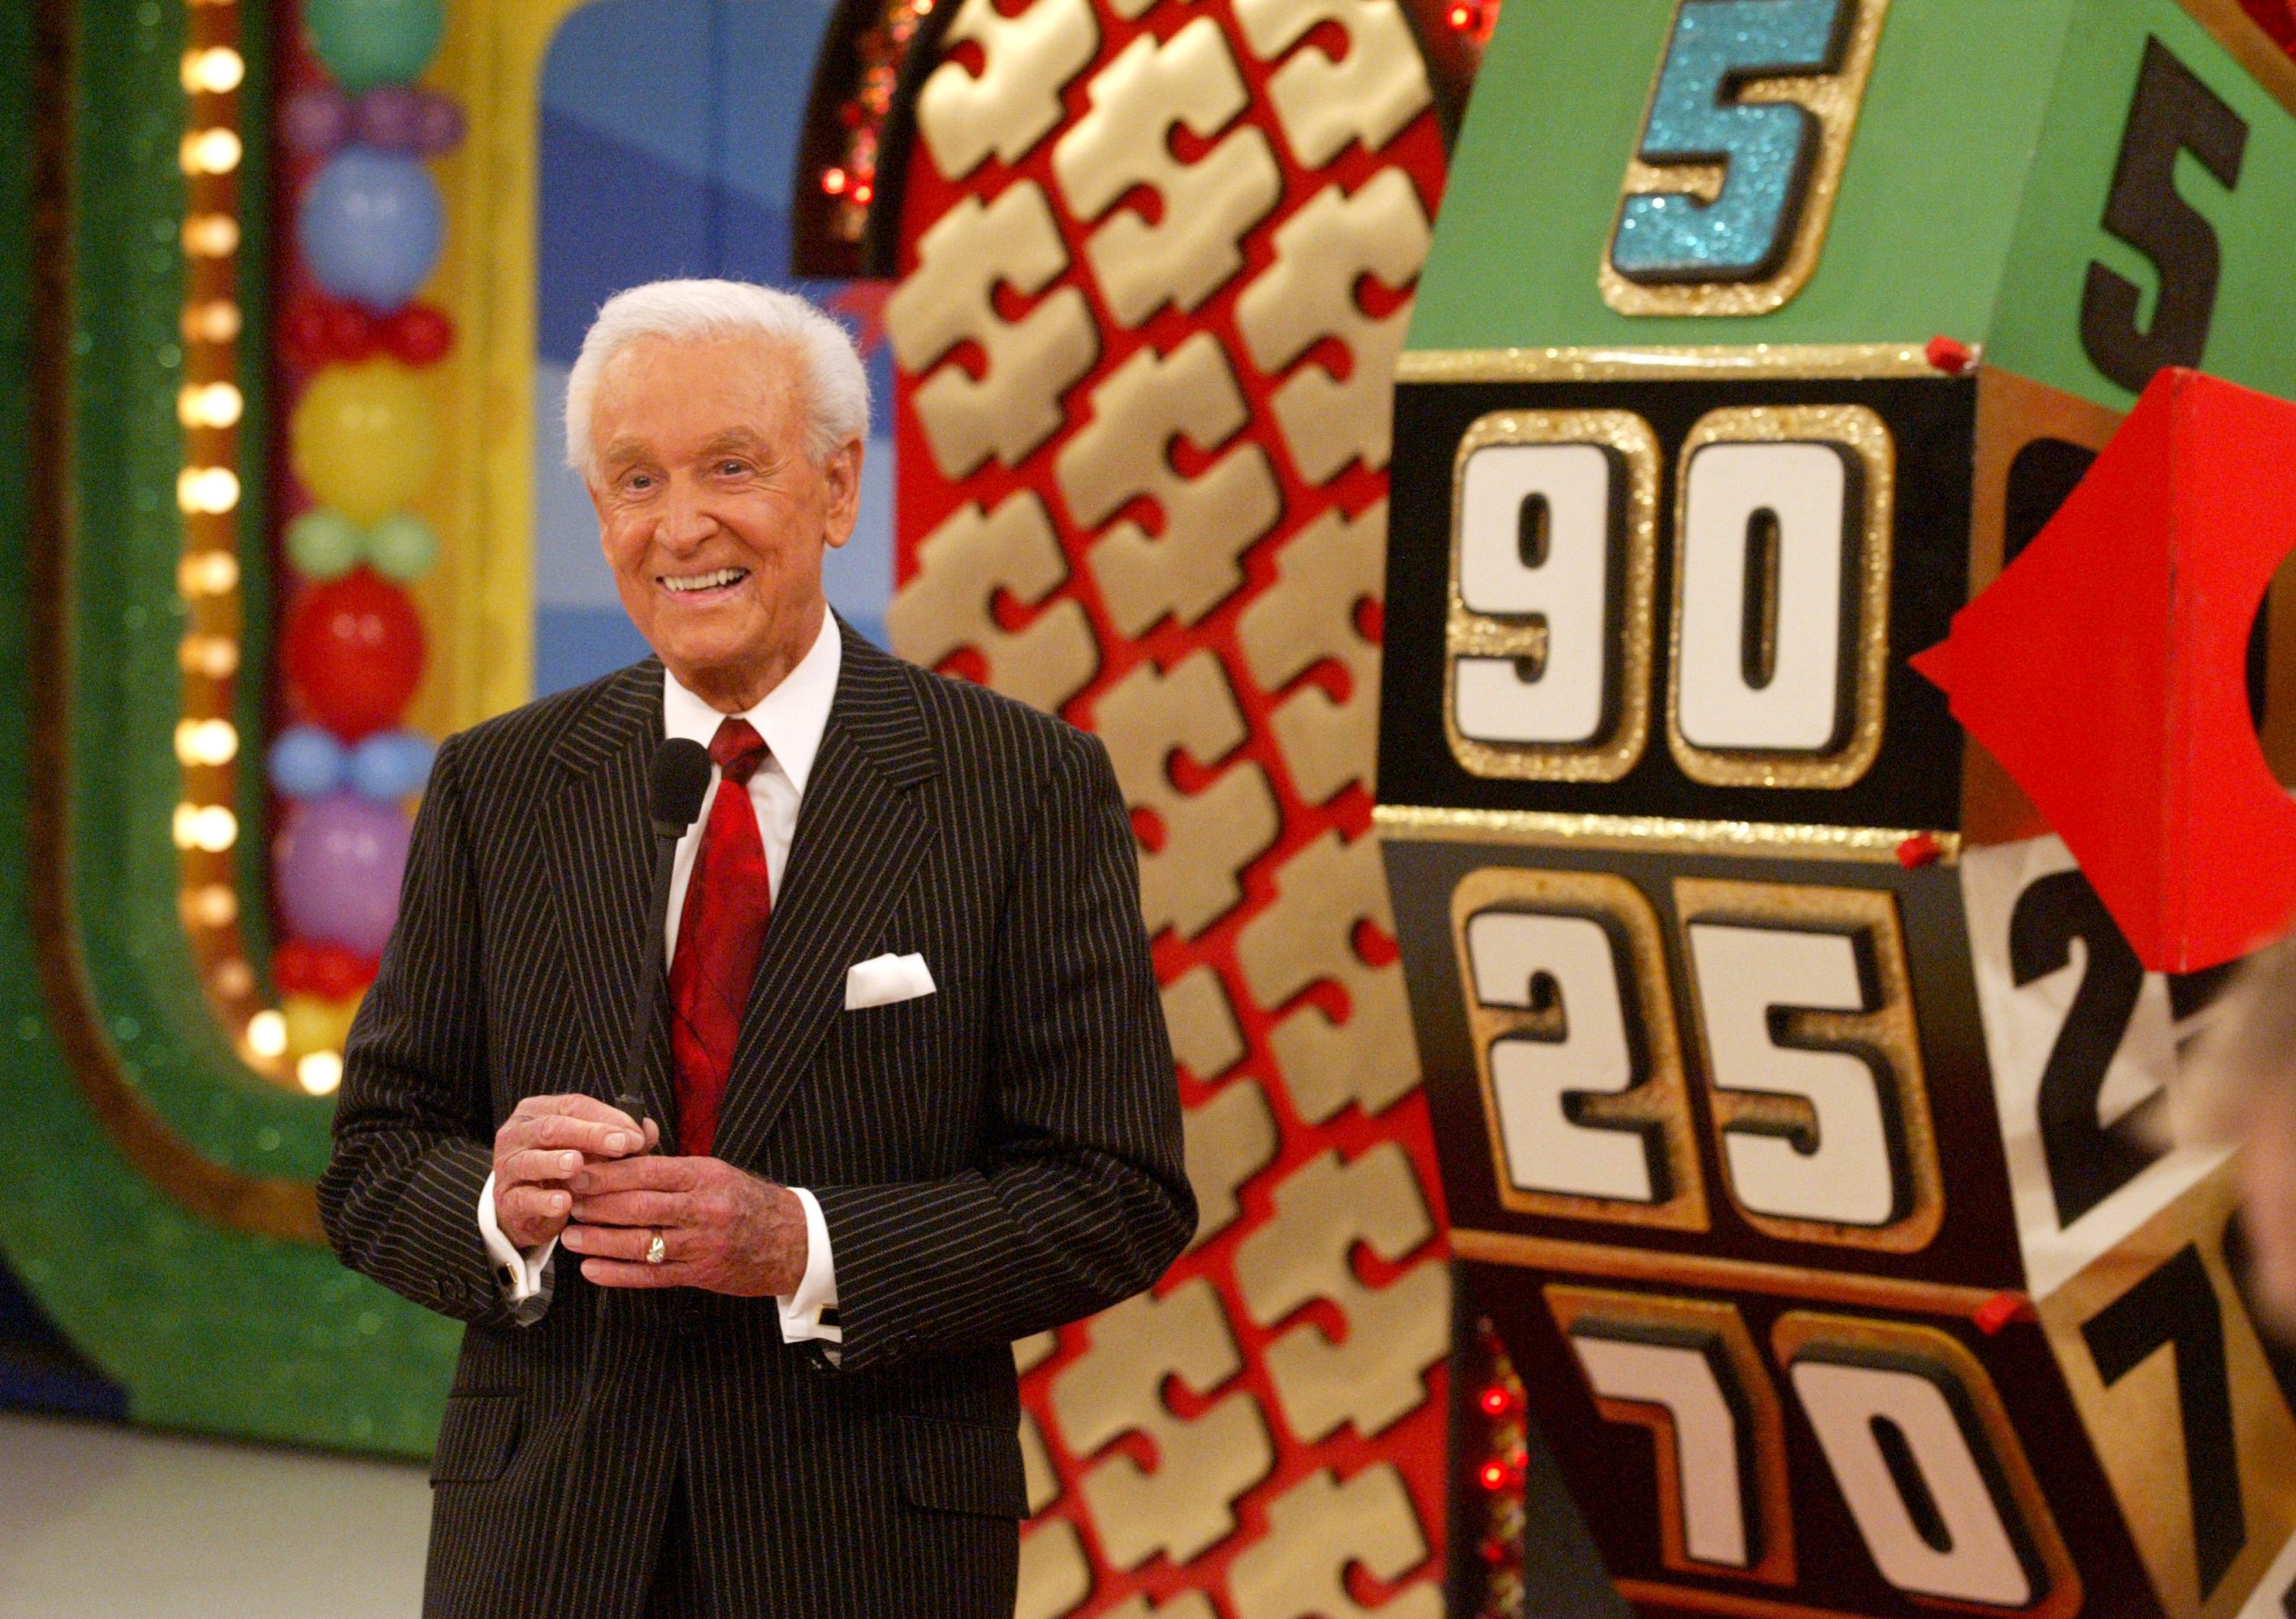 Bob Barker at the set of  "The Price is Right" during the Season 34 premiere at CBS Television City in Los Angeles, California | Source: Getty Images